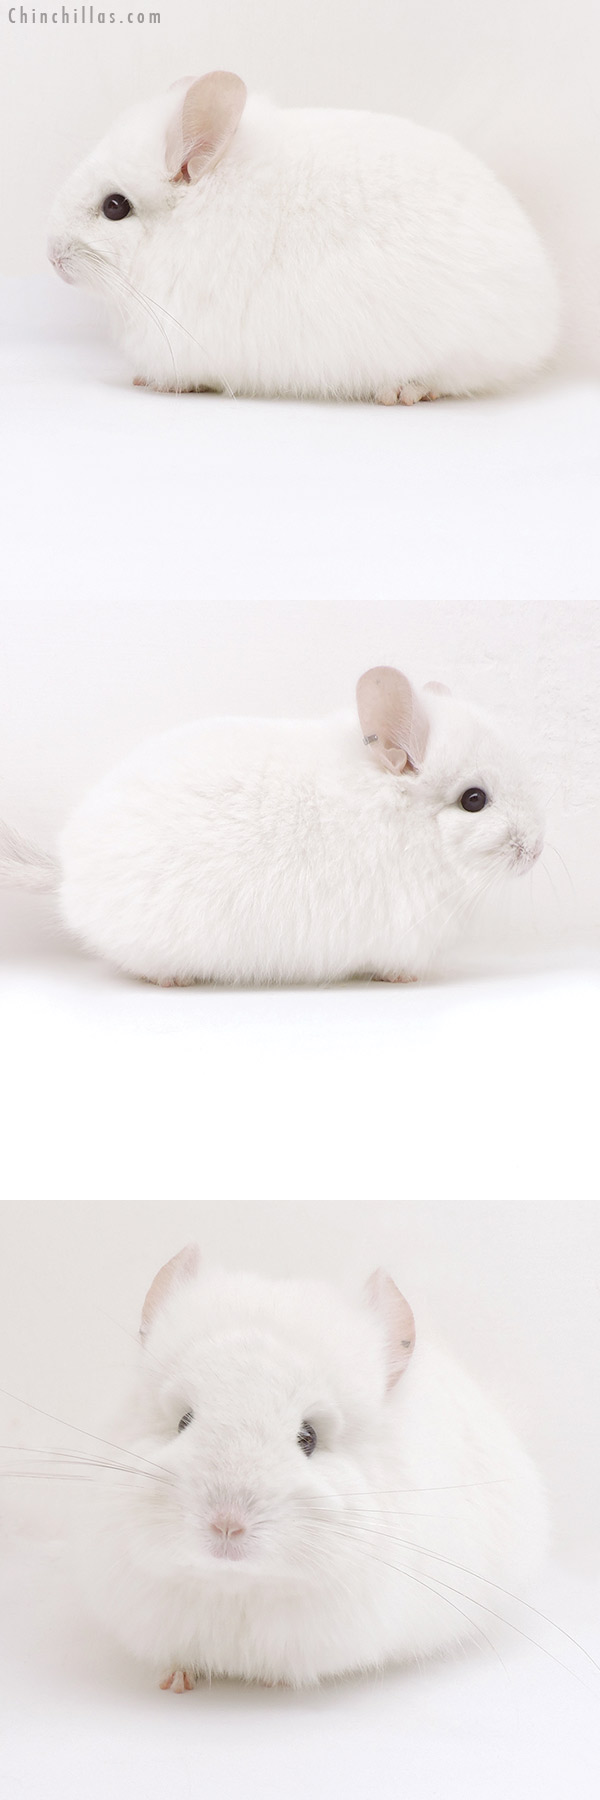 Chinchilla or related item offered for sale or export on Chinchillas.com - 18049 Exceptional Pink White  Royal Persian Angora Female Chinchilla